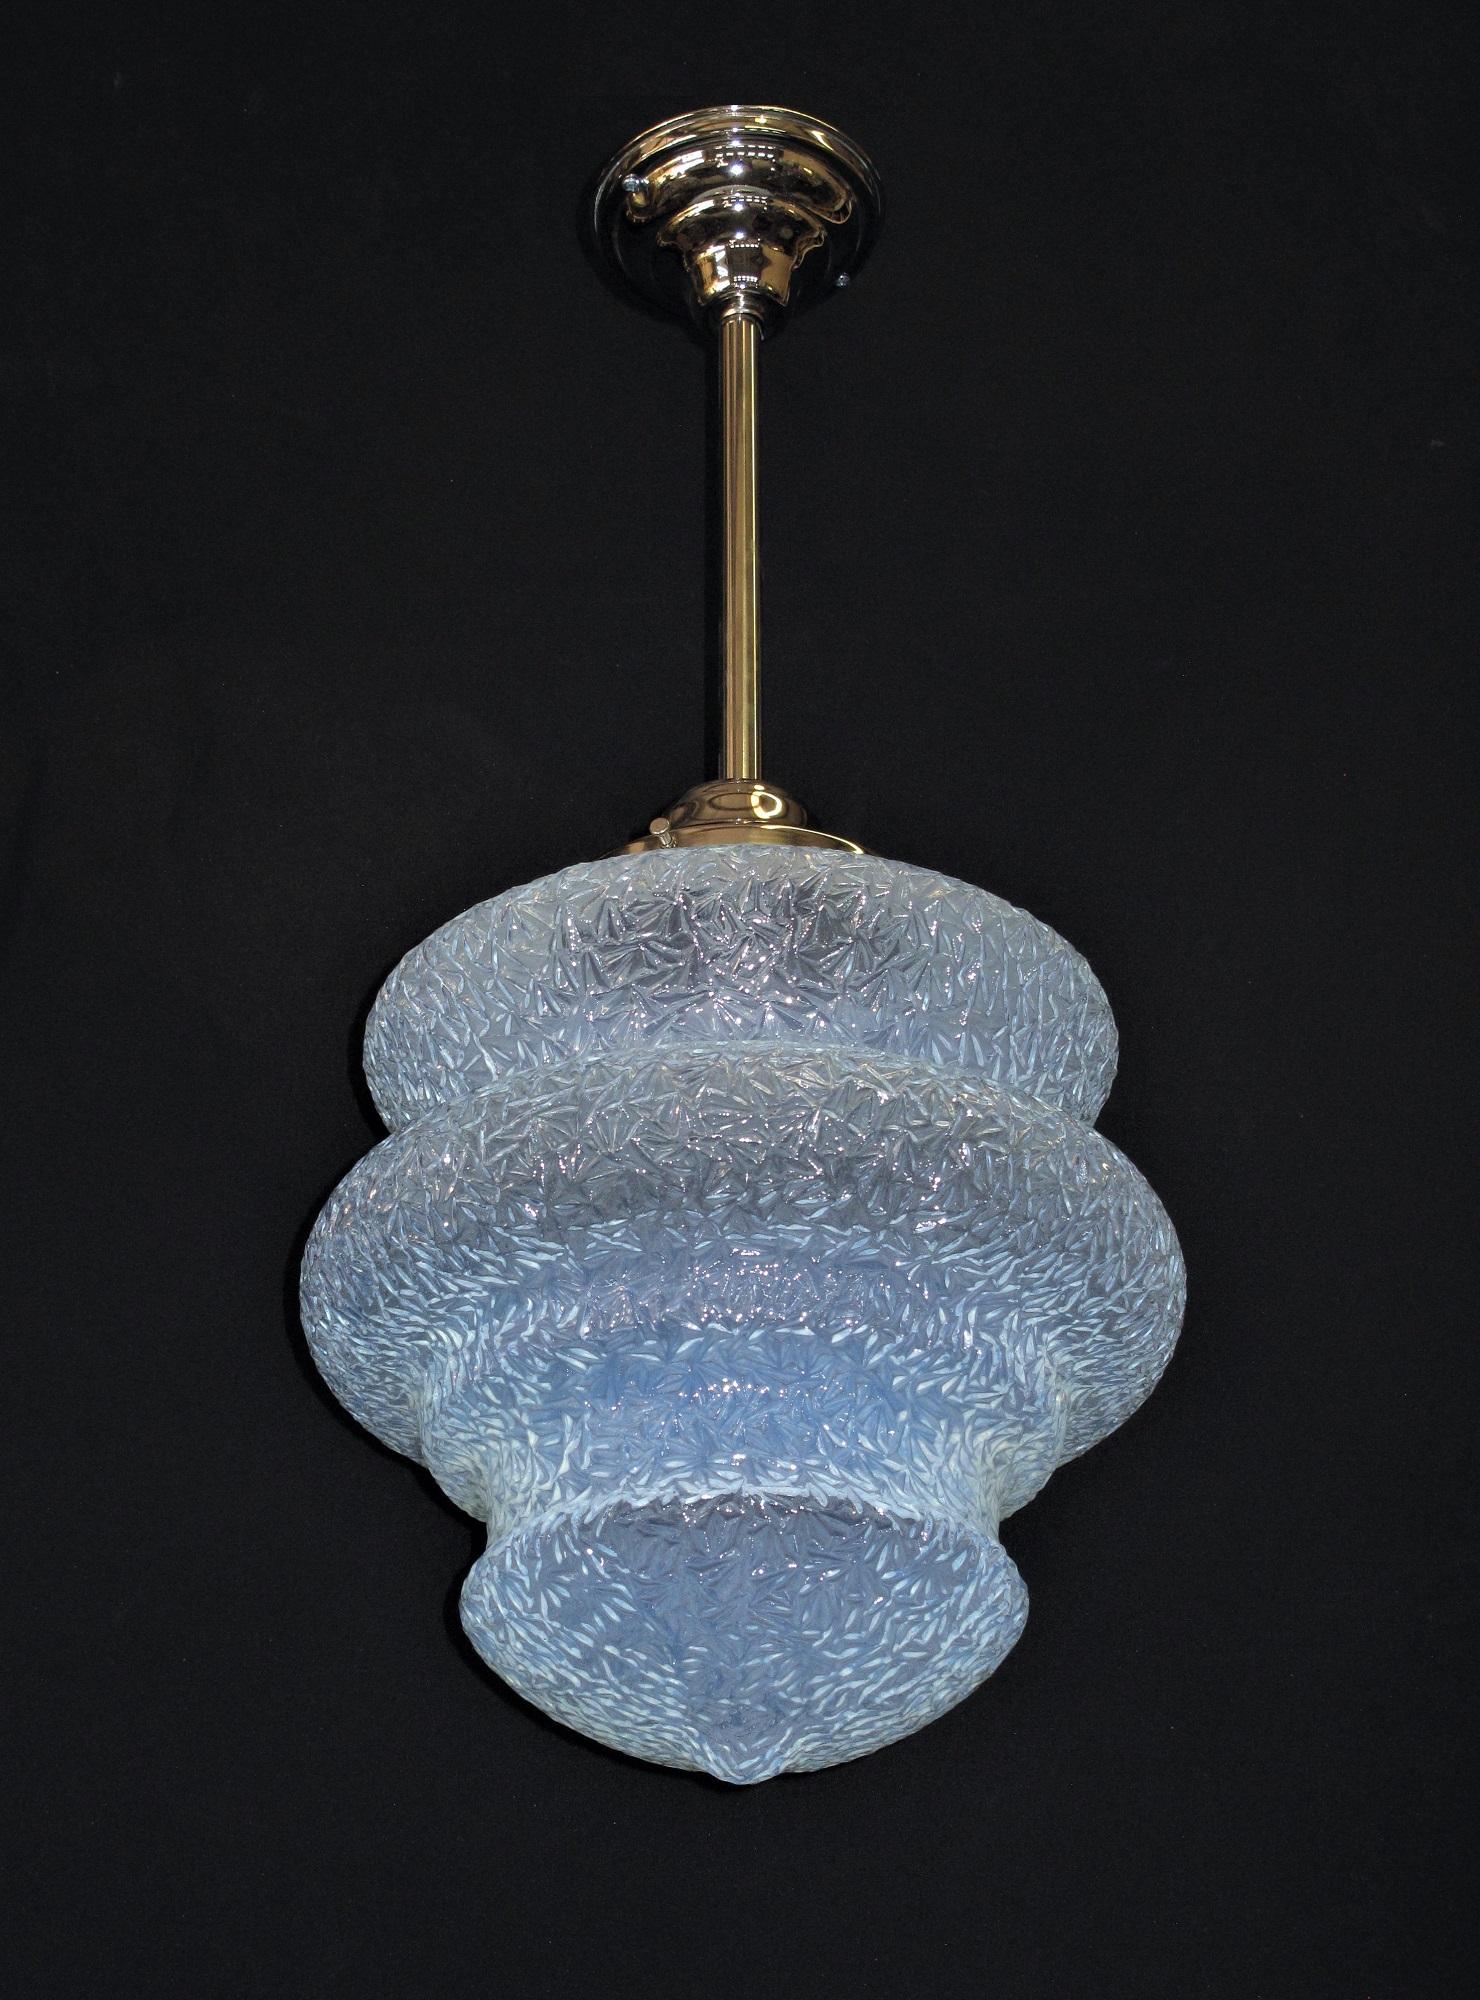 Vintage 1920s Mammoth Ice Blue Deco Fixture In Excellent Condition For Sale In Prescott, US